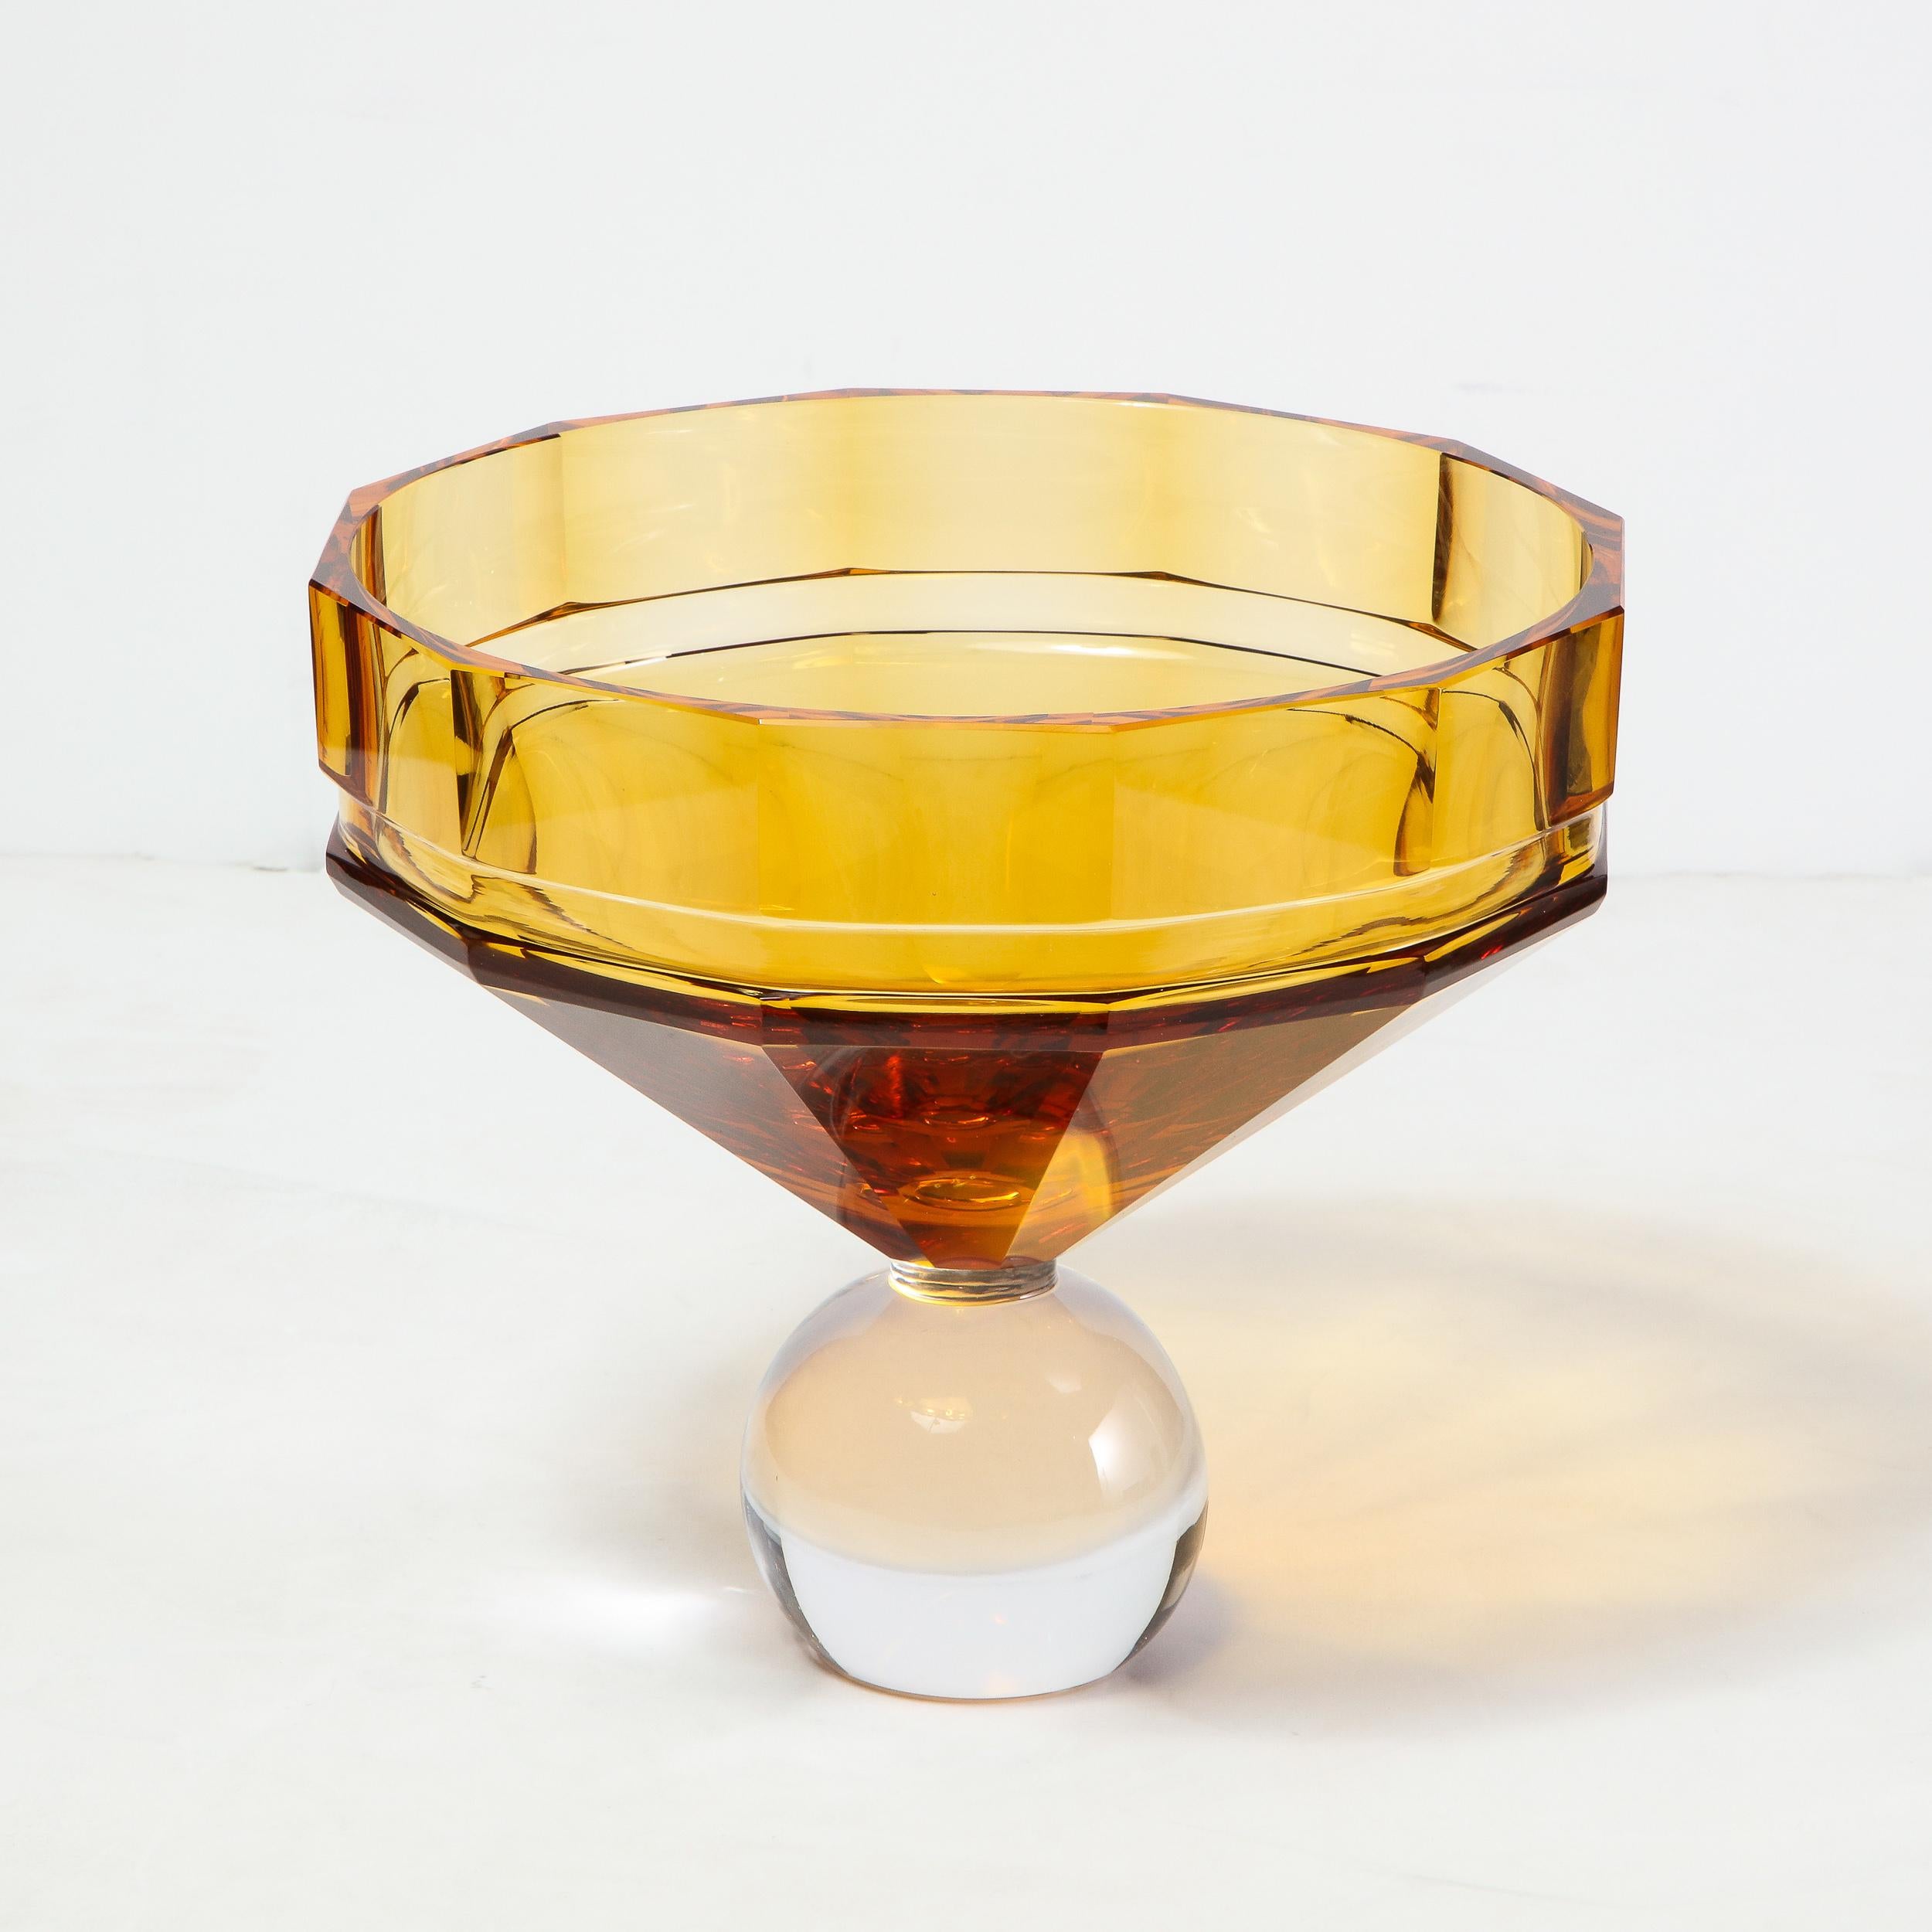 This stunning modernist glass center bowl was realized in the Czech Republic by the legendary maker Moser. It features a spherical translucent foot; an angled amber neck and faceted top that beautifully refracts light. With its sophisticated palate